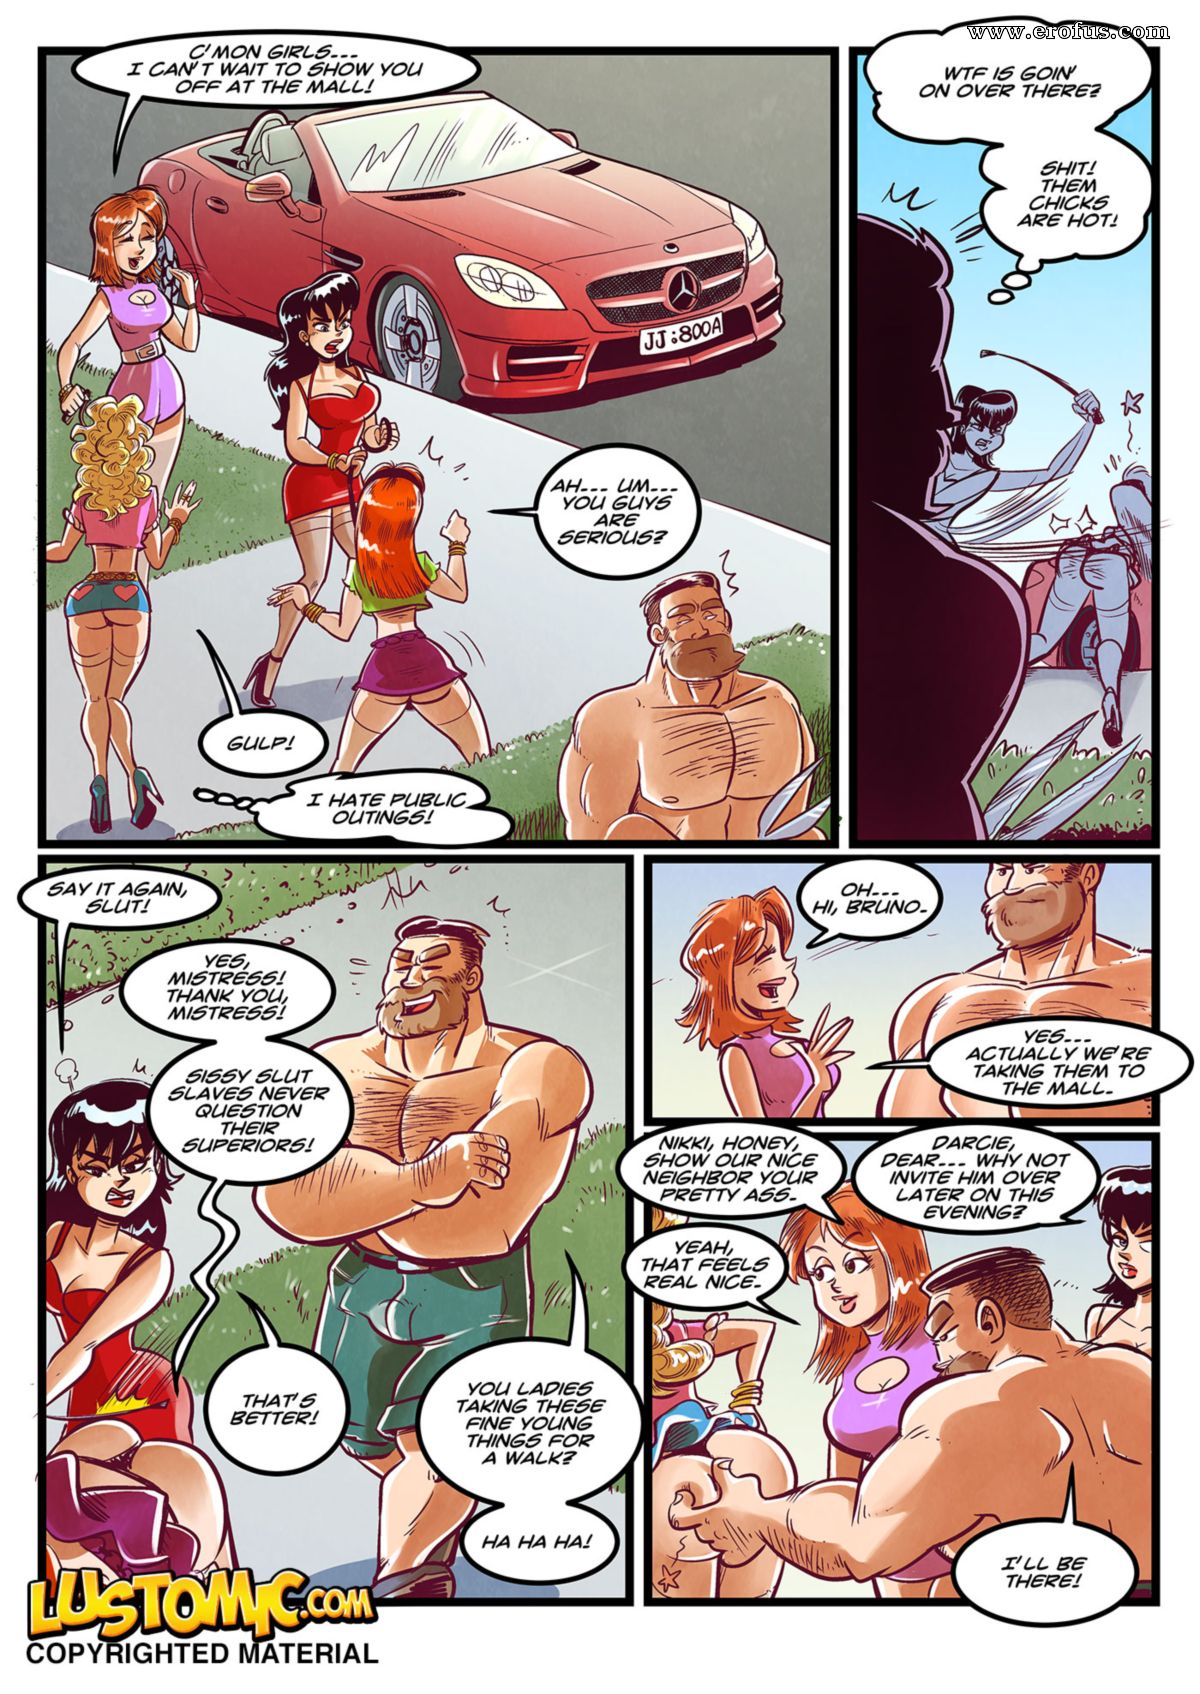 Cartoon Strapon Milf - Page 13 | lustomic_com-comics/cross-dressing-therapy/issue-2-house-call |  Erofus - Sex and Porn Comics